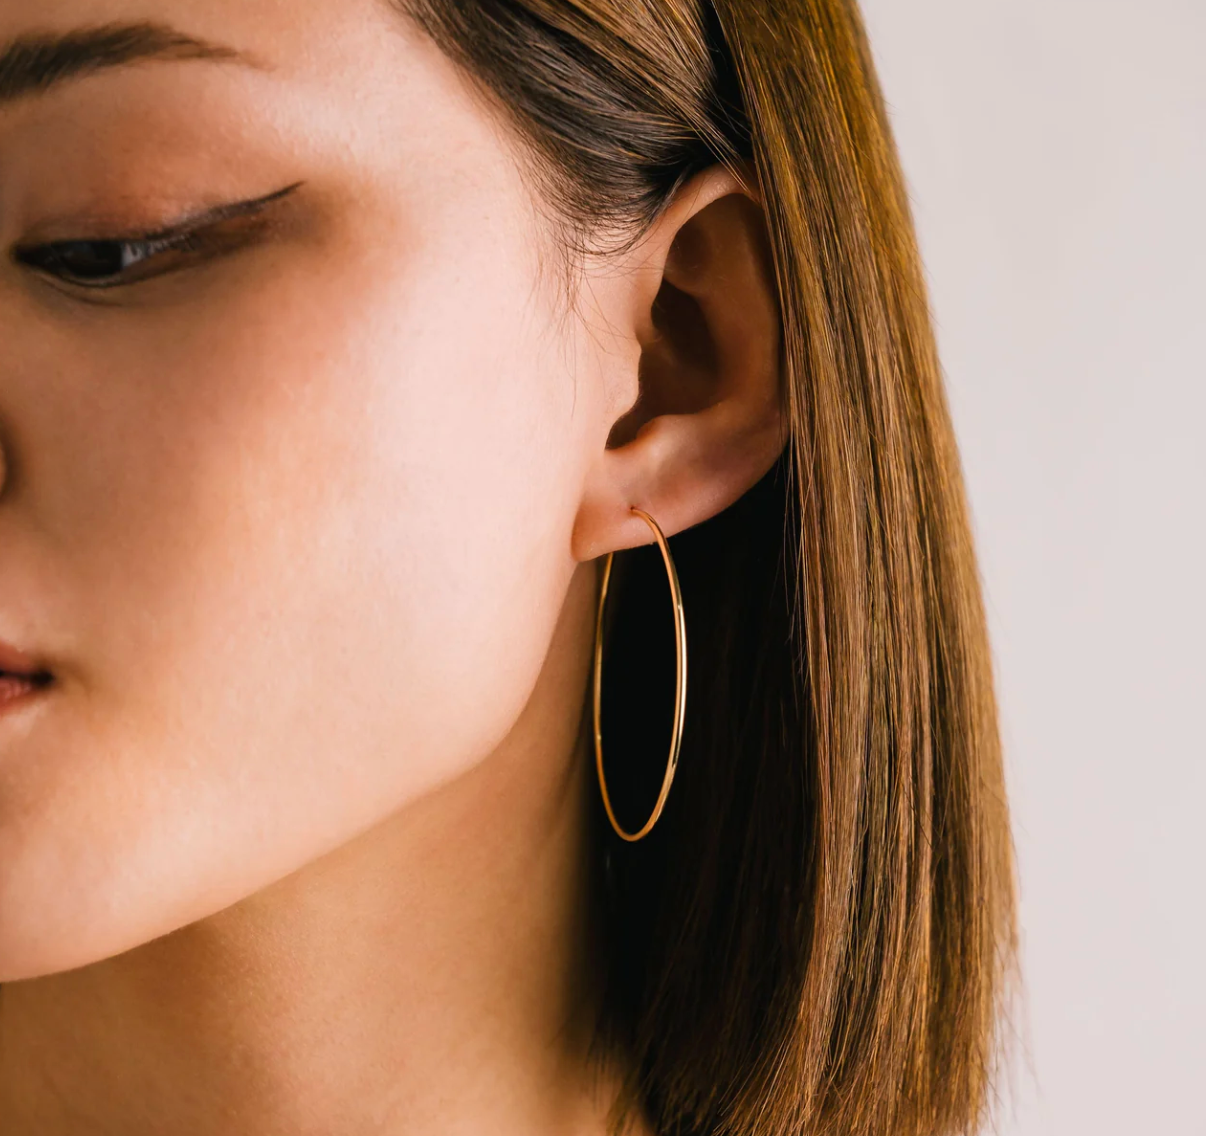 Gold-Filled Infinity Hoops